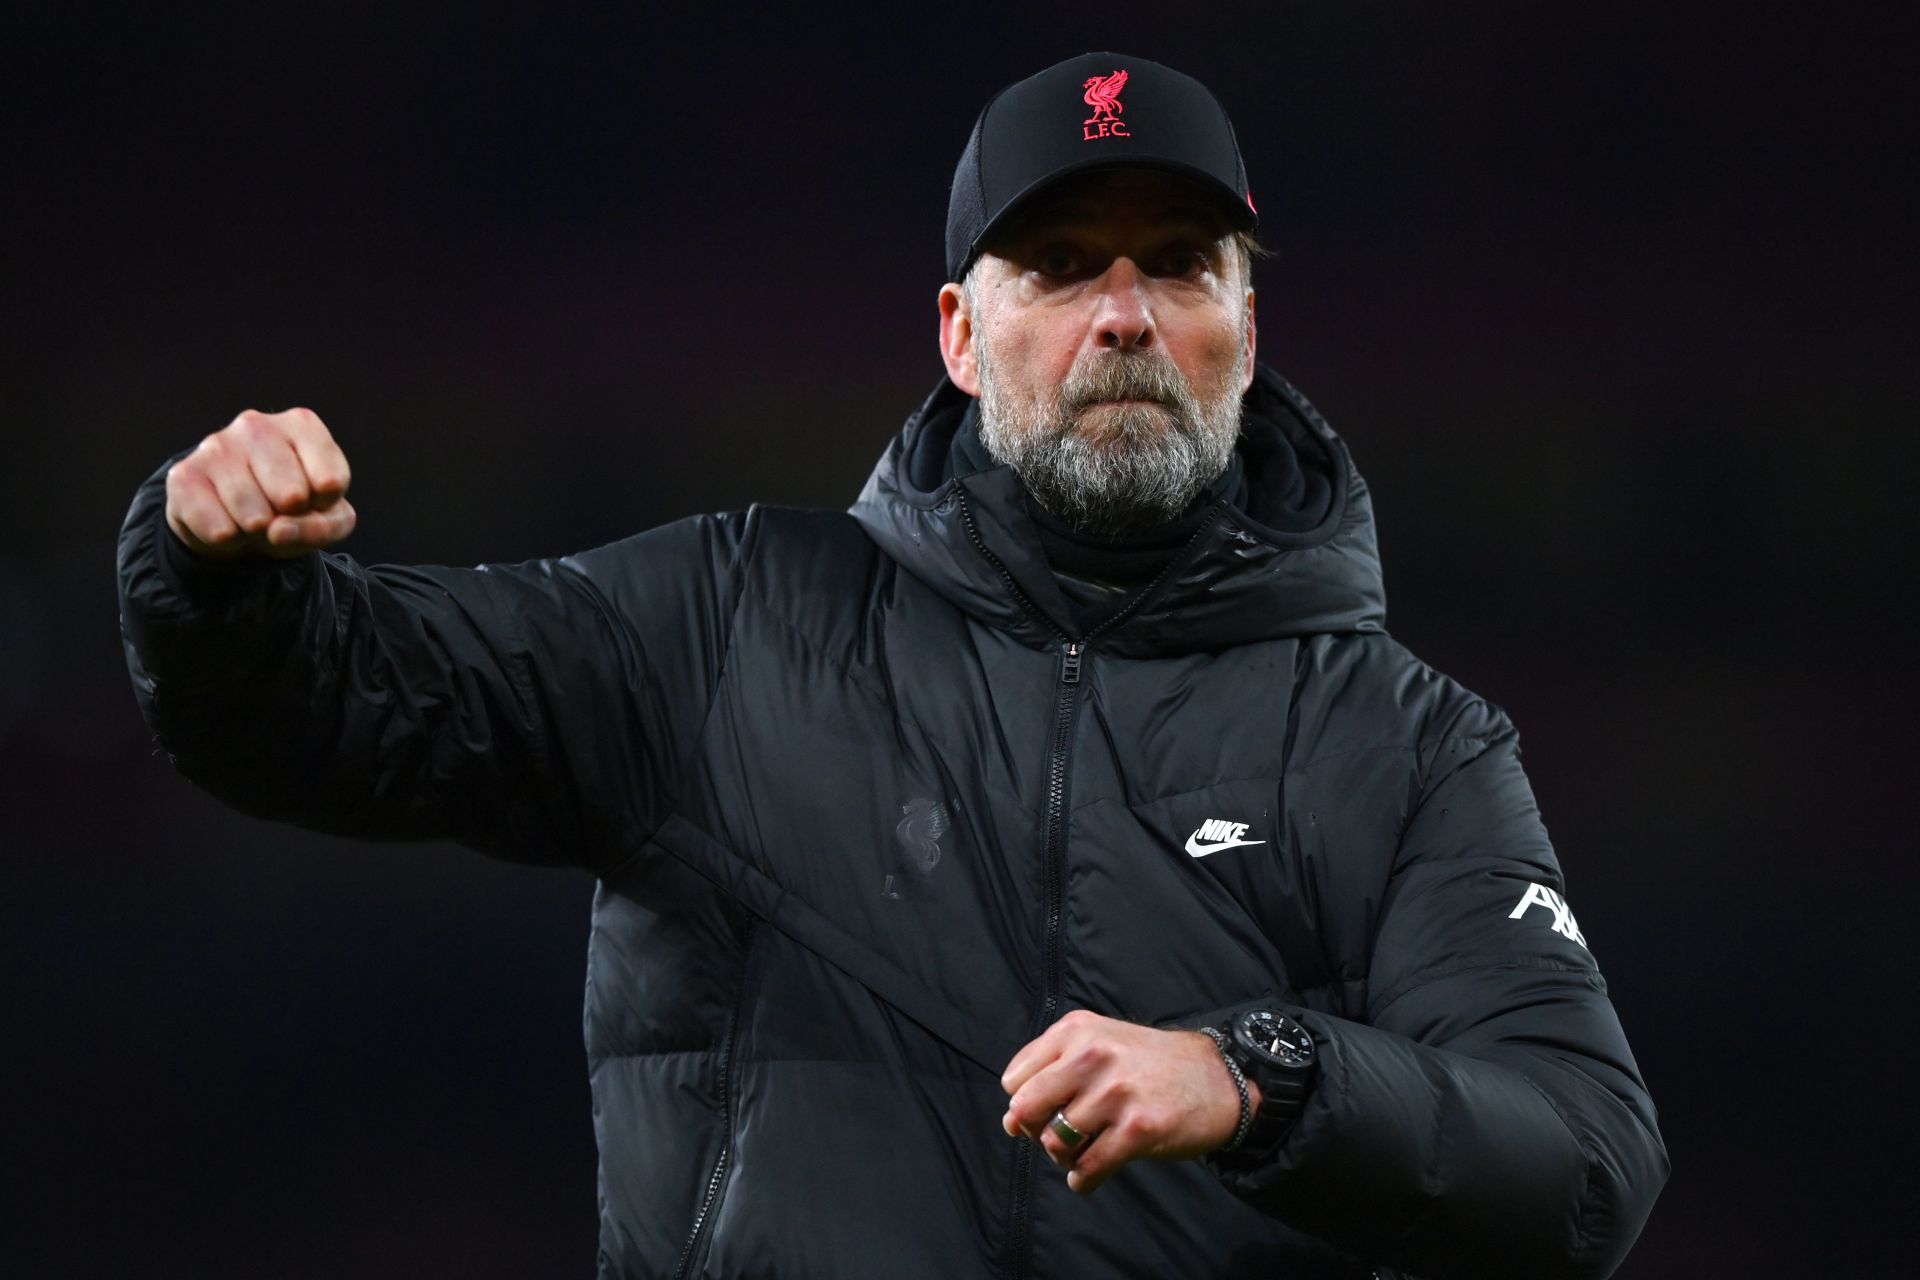 Klopp will be looking to win another EPL title